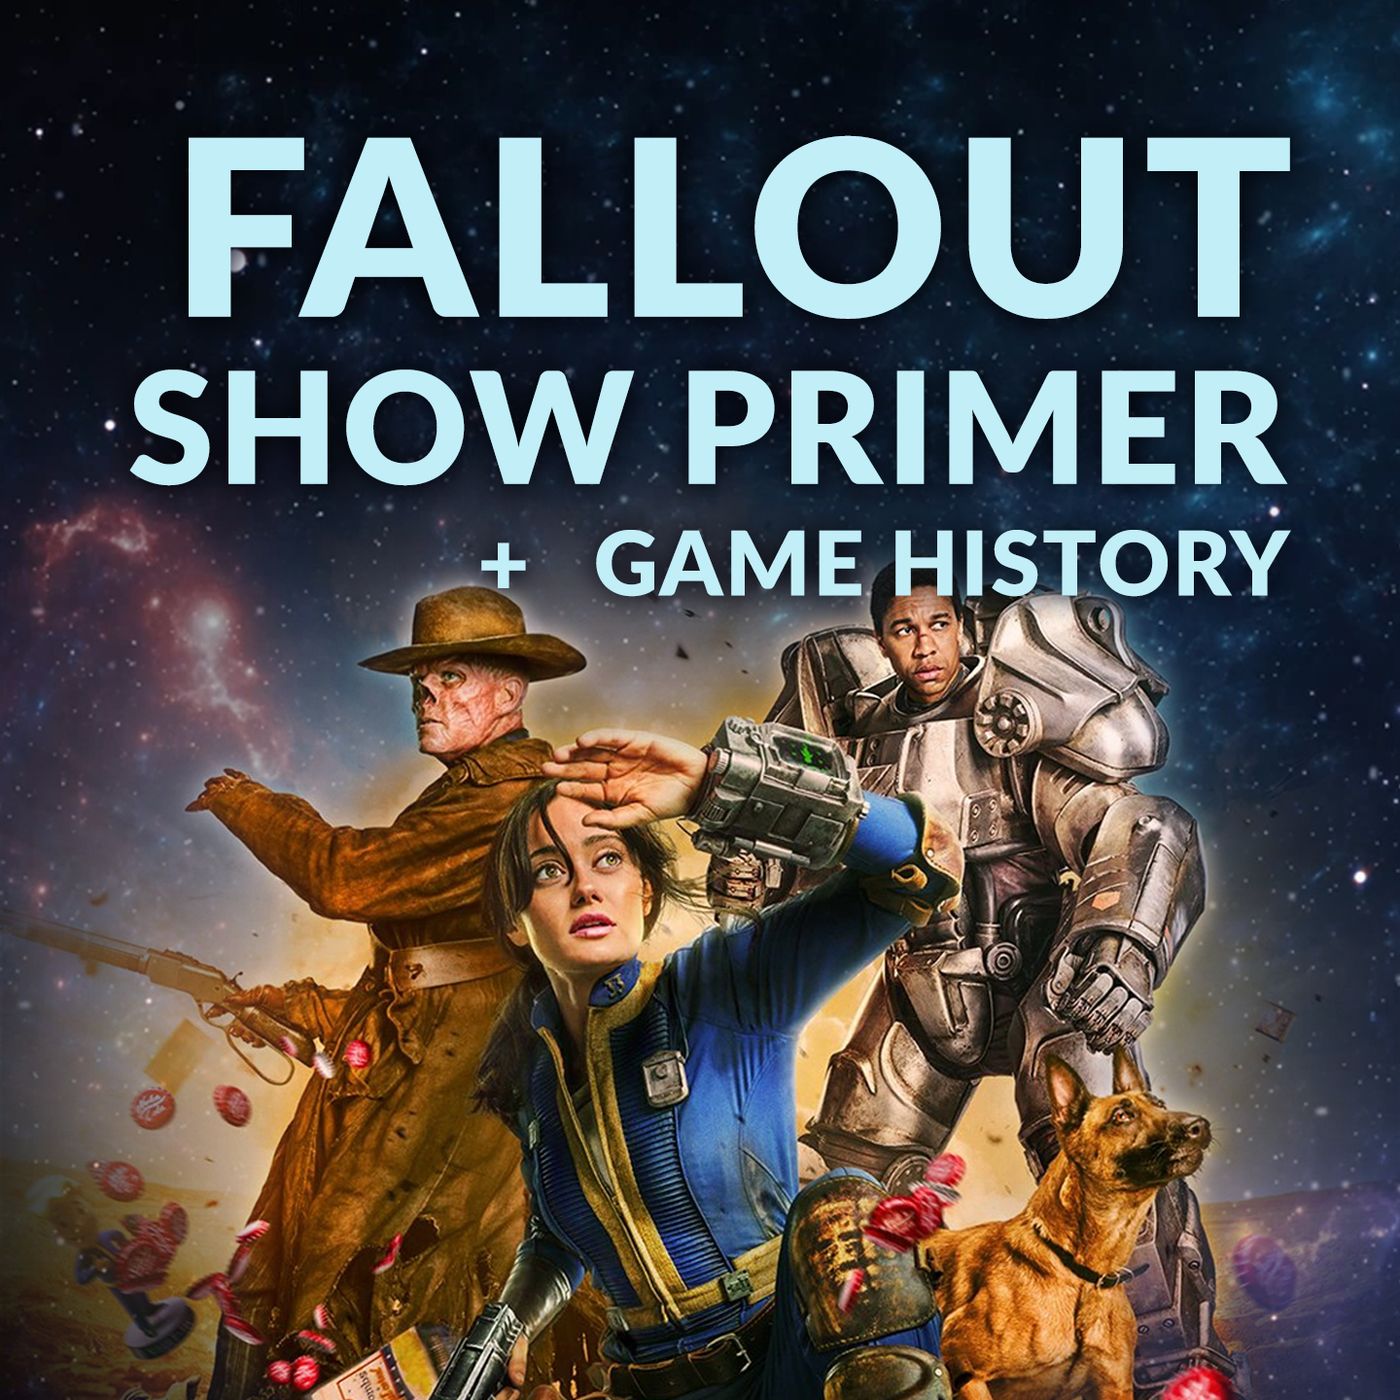 Ep. 162 - Fallout Show Primer + Game History